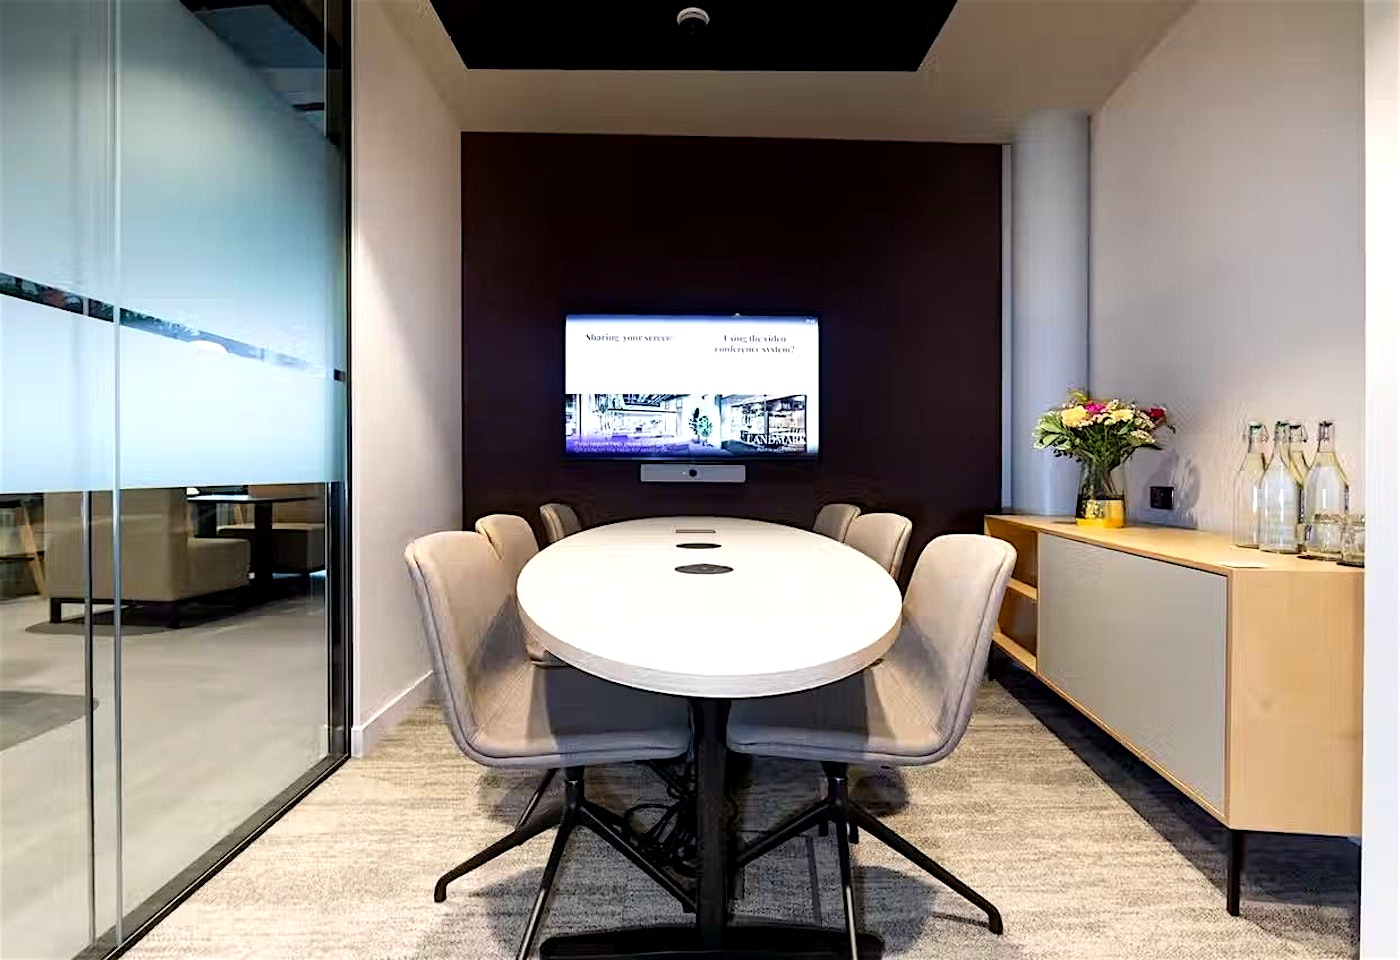 A mid-sized meeting room in London with TV screen